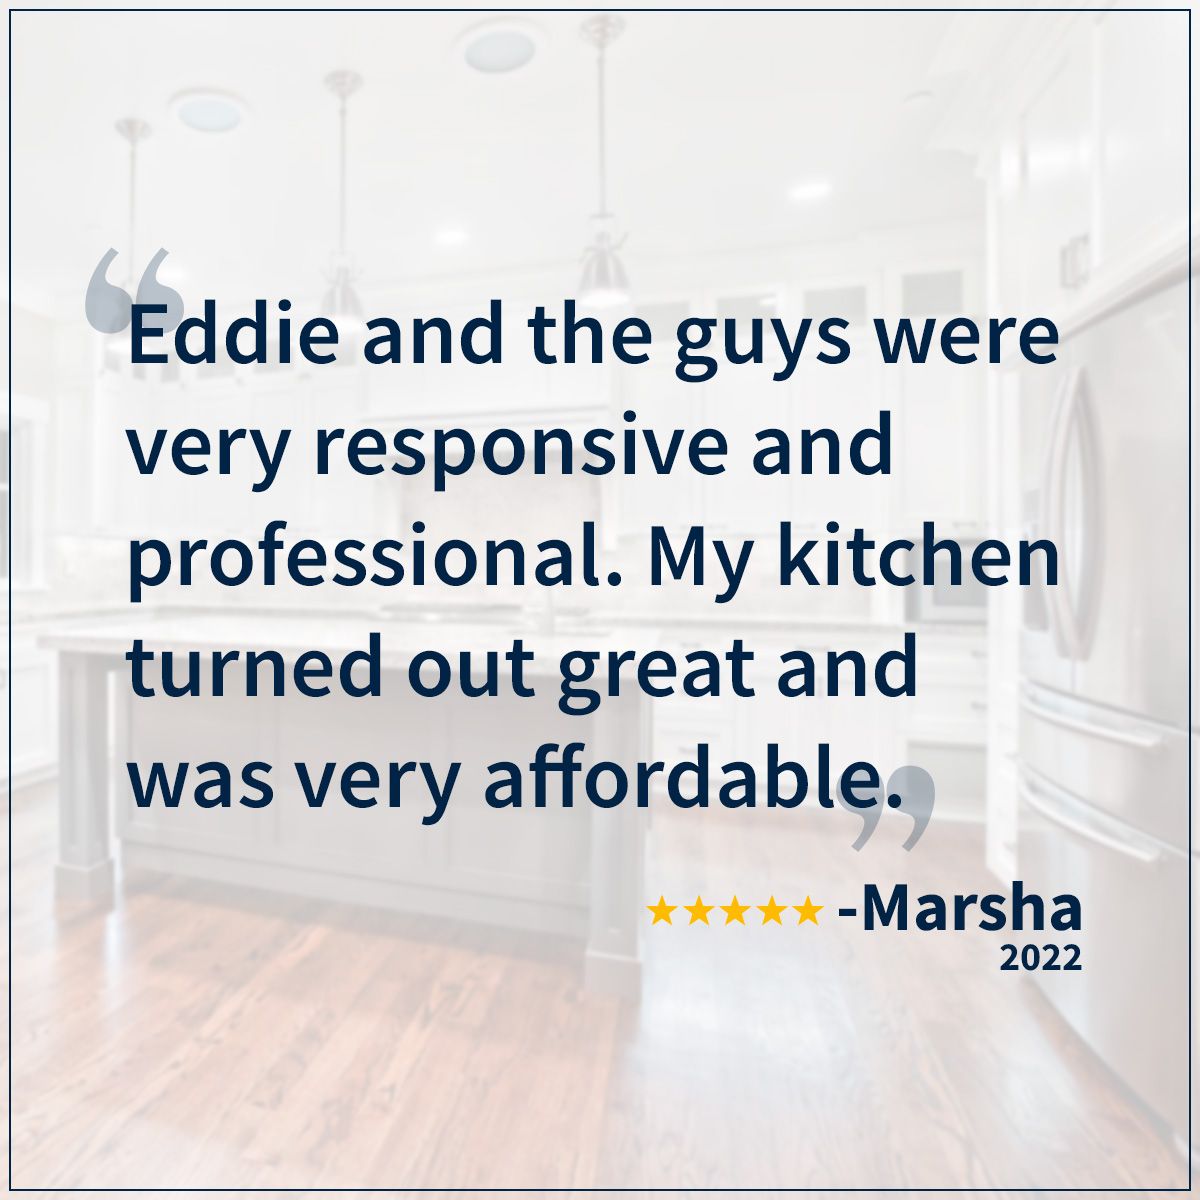 Eddie and the guys were very responsive and professional. My kitchen turned out great and was very affordable. Marsha - 2022